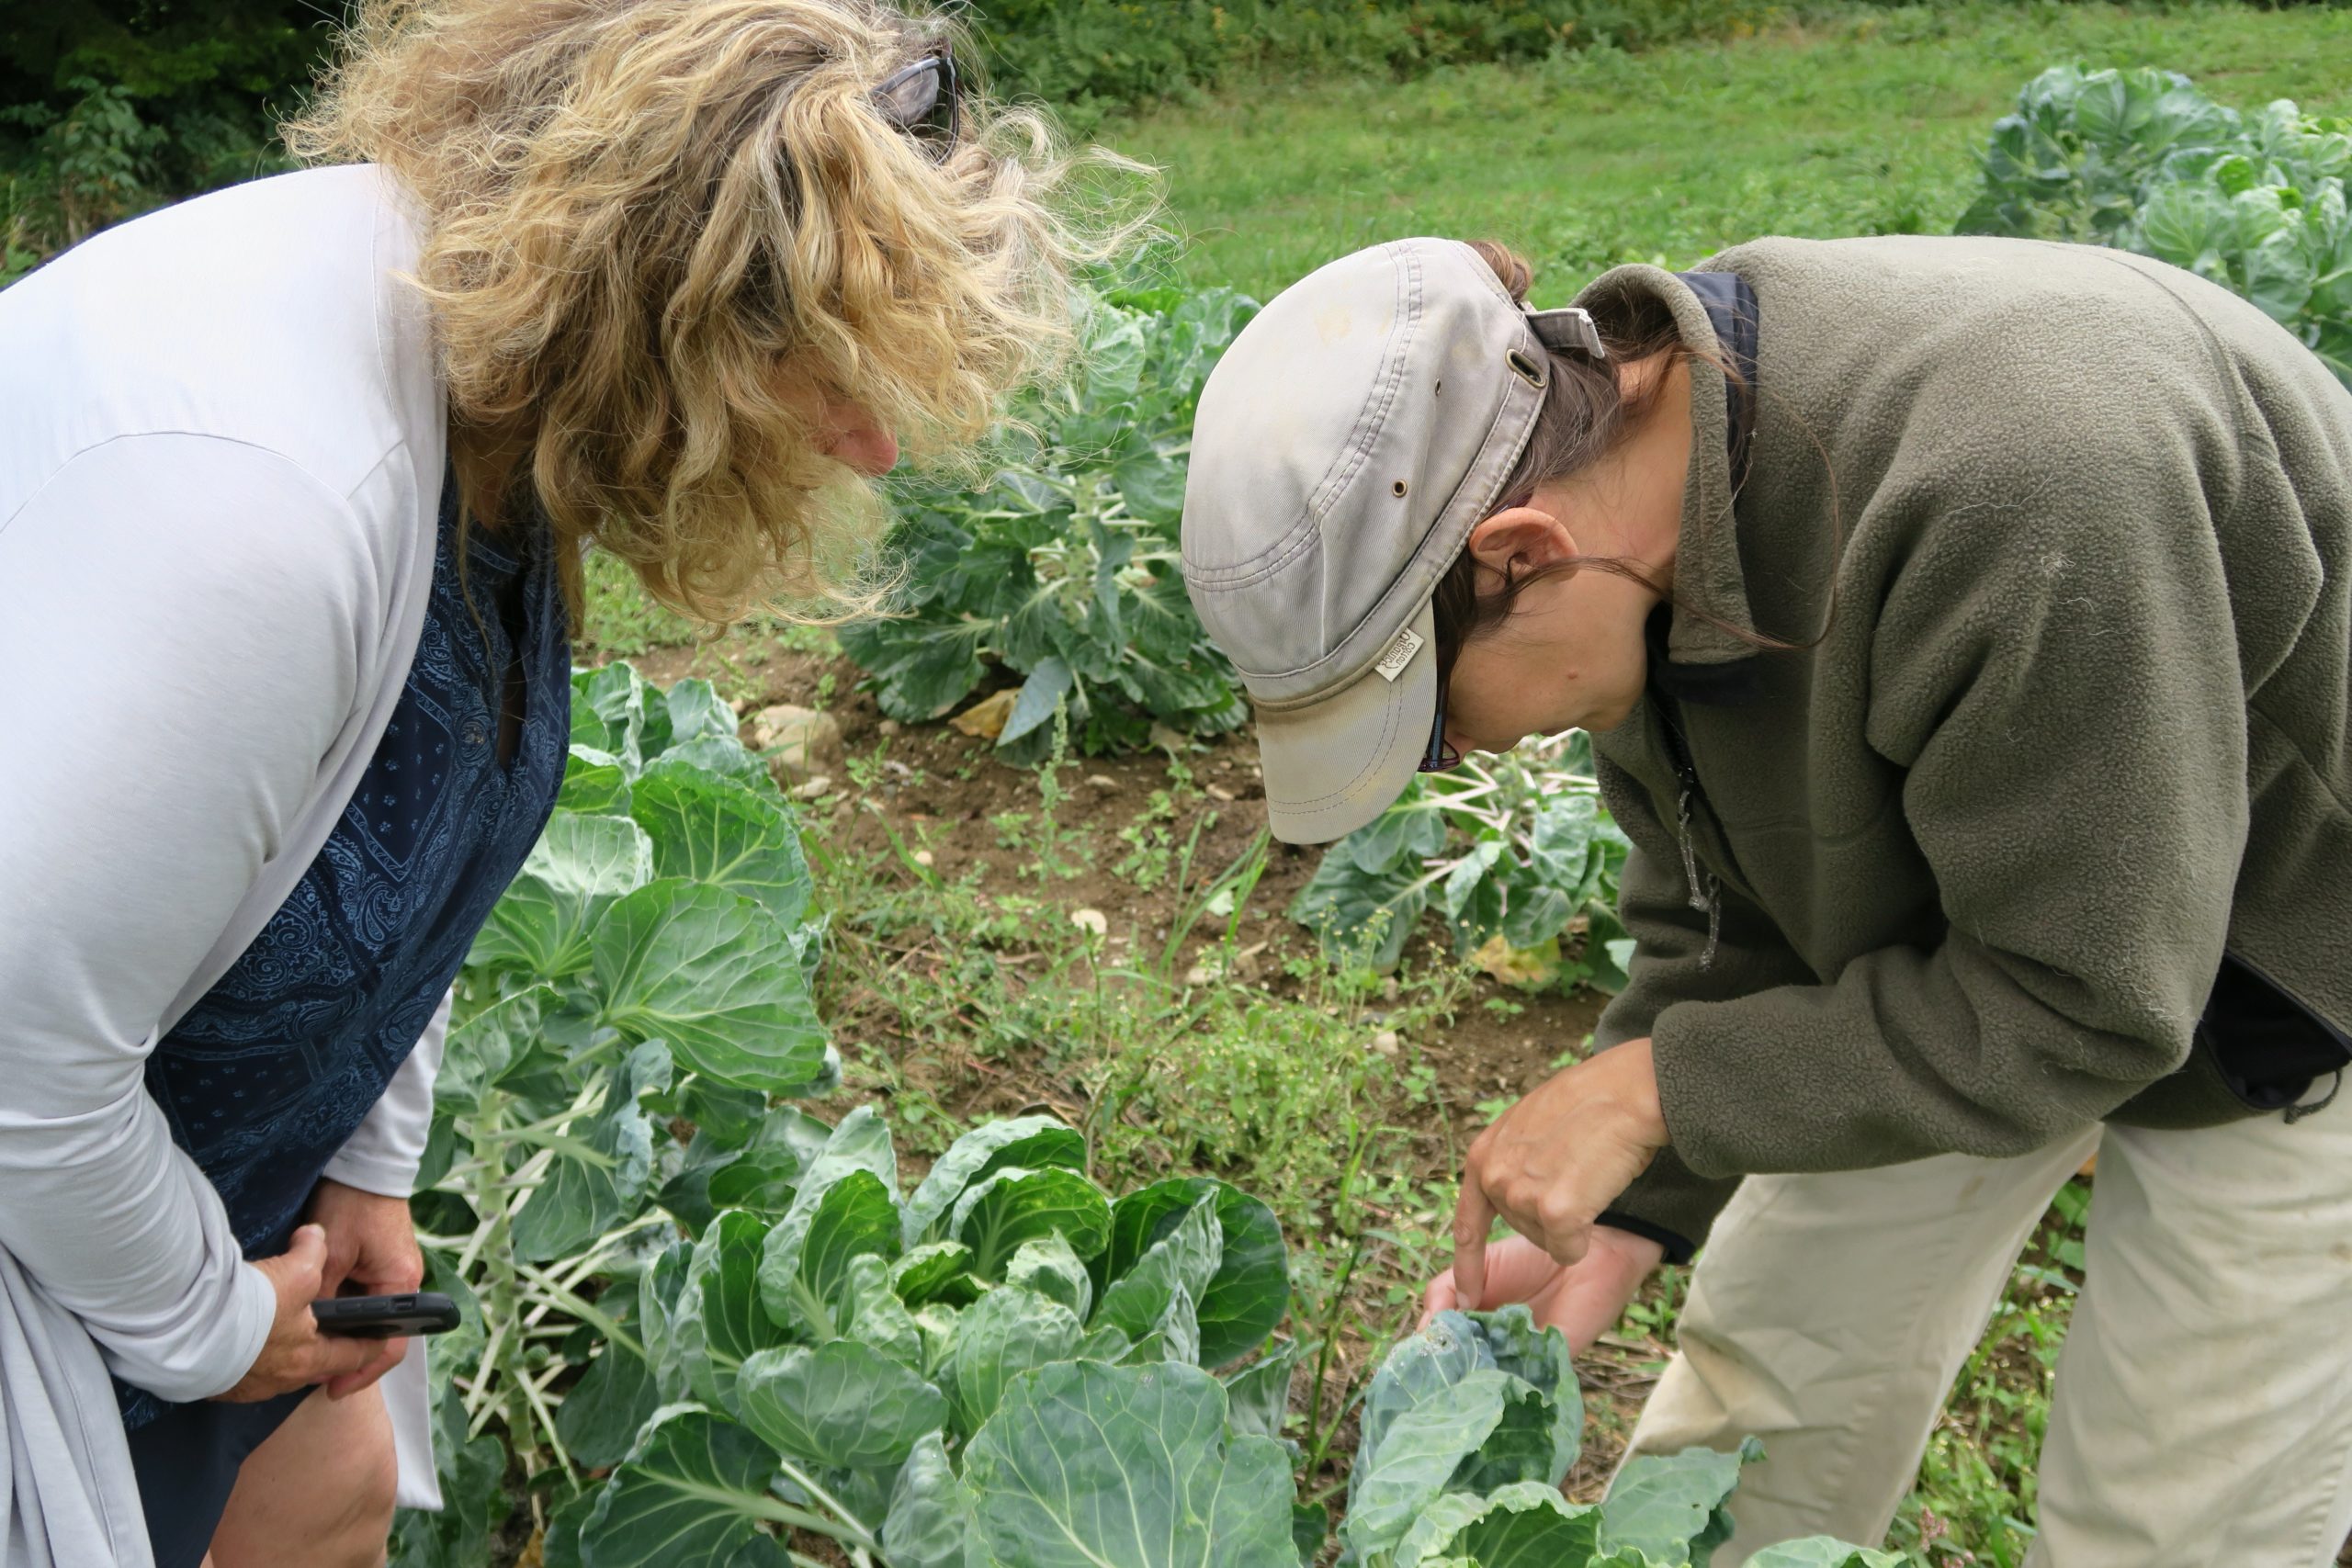 Two women leaning over and inspecting a vegetable crop